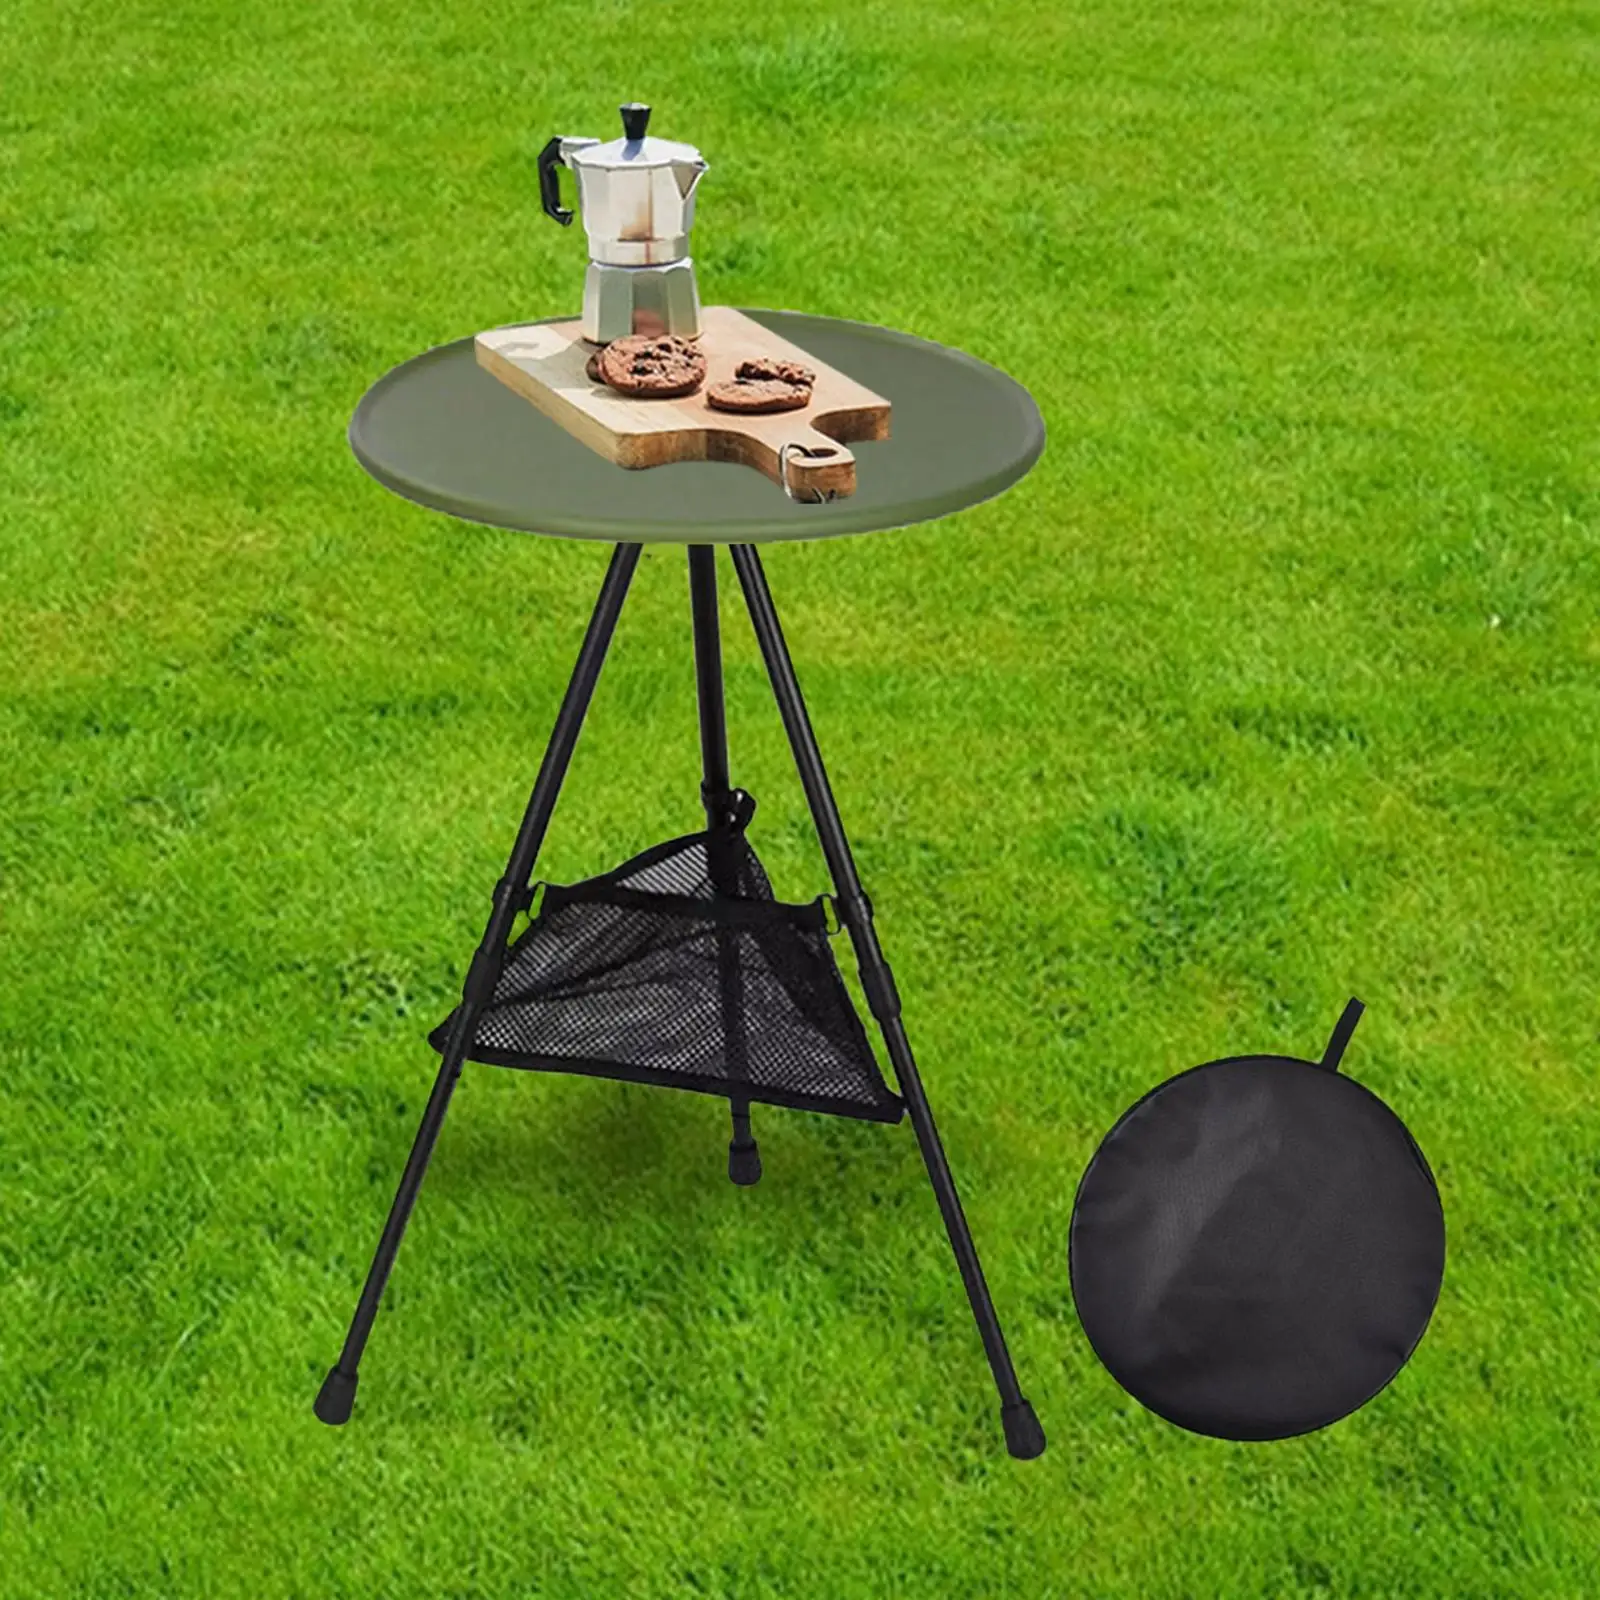 Foldable Picnic Table Coffee Tea Table Folding Camping Table Portable Ultralight Outdoor Round Table for Garden Cooking Barbecue